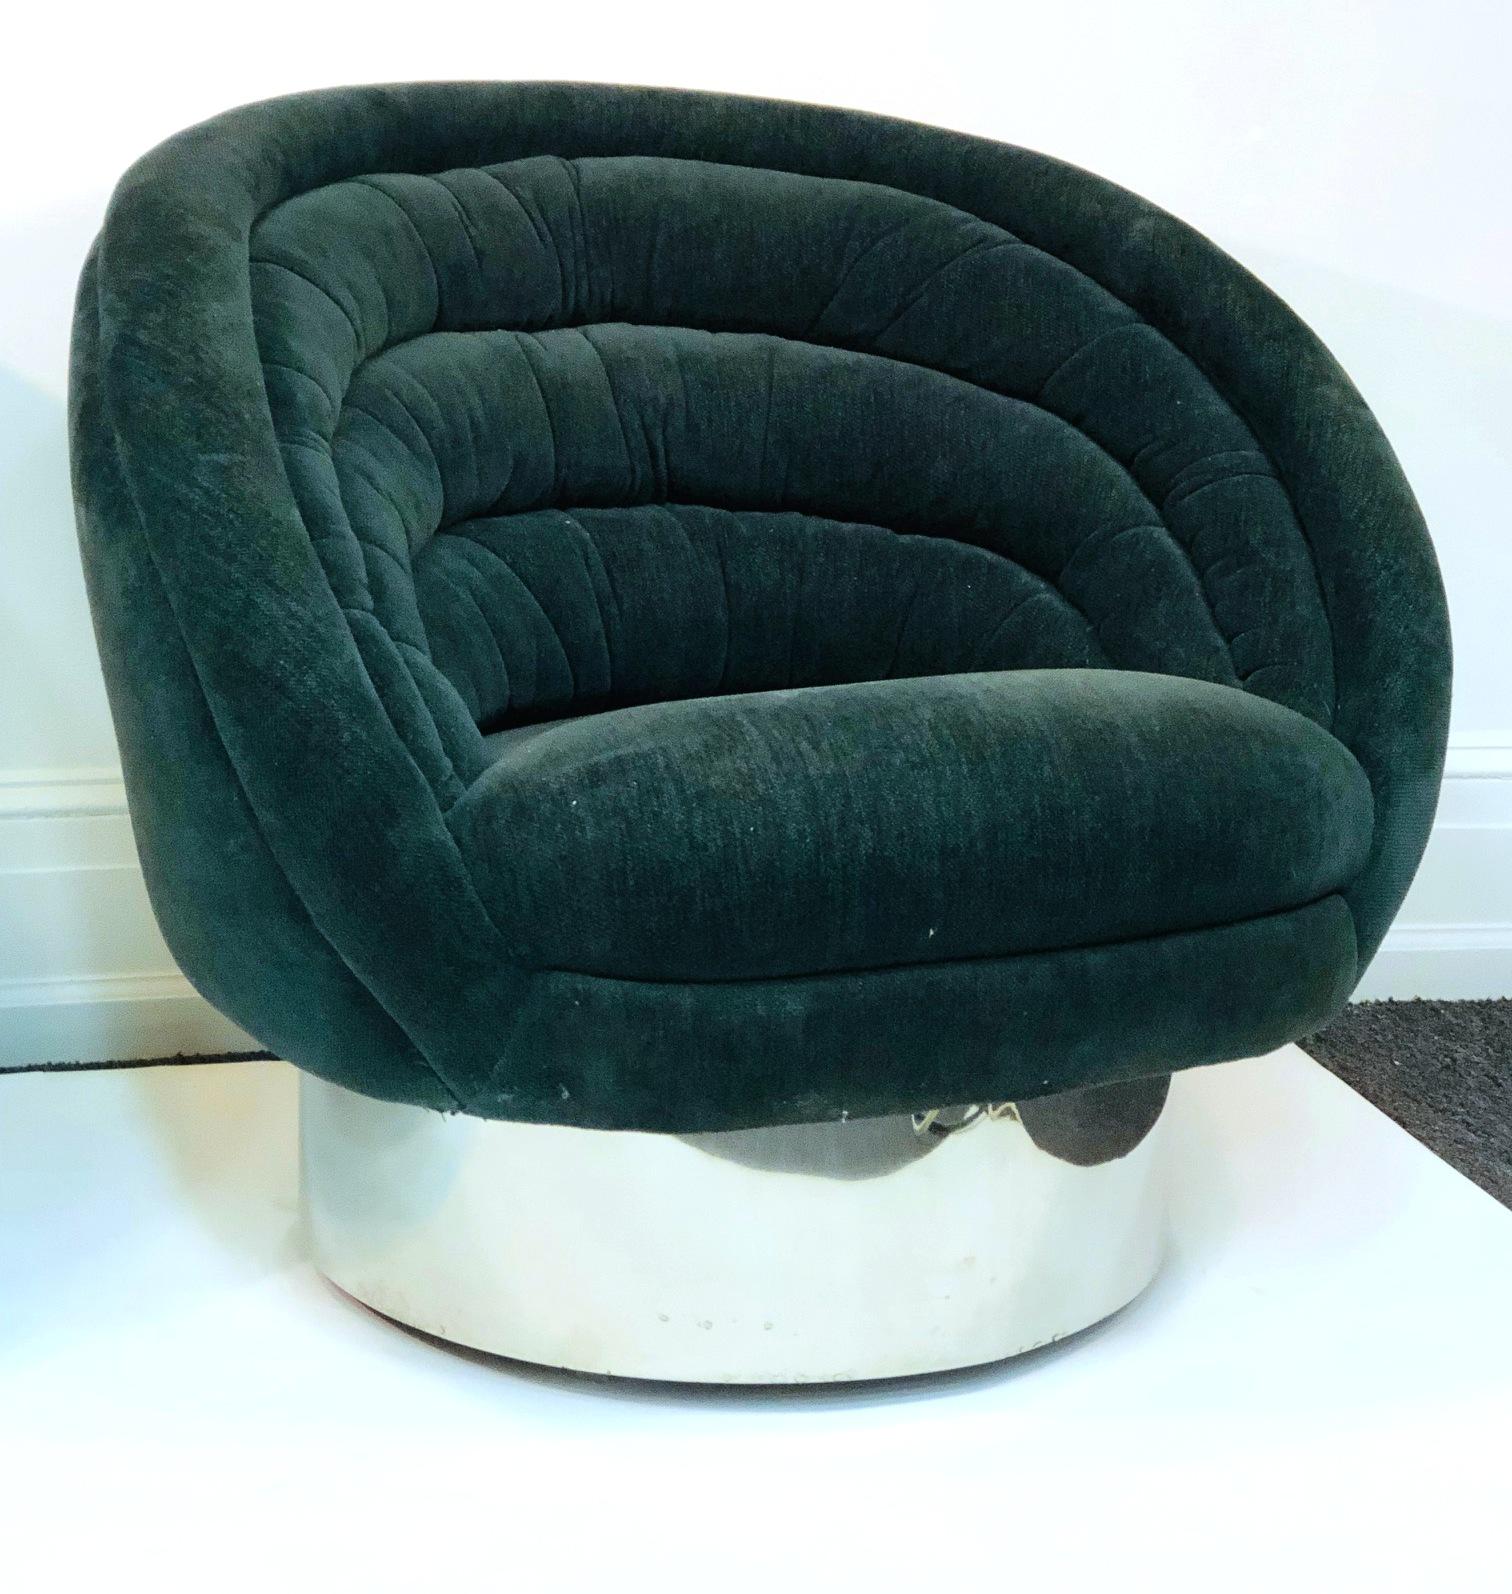 Modern pair of lounge chairs designed by Vladimir Kagan during the 1970s. The pair has circular steel bases and lush upholstered seats. Original label on the bottom. The pair is in good vintage condition with some age-appropriate wear.